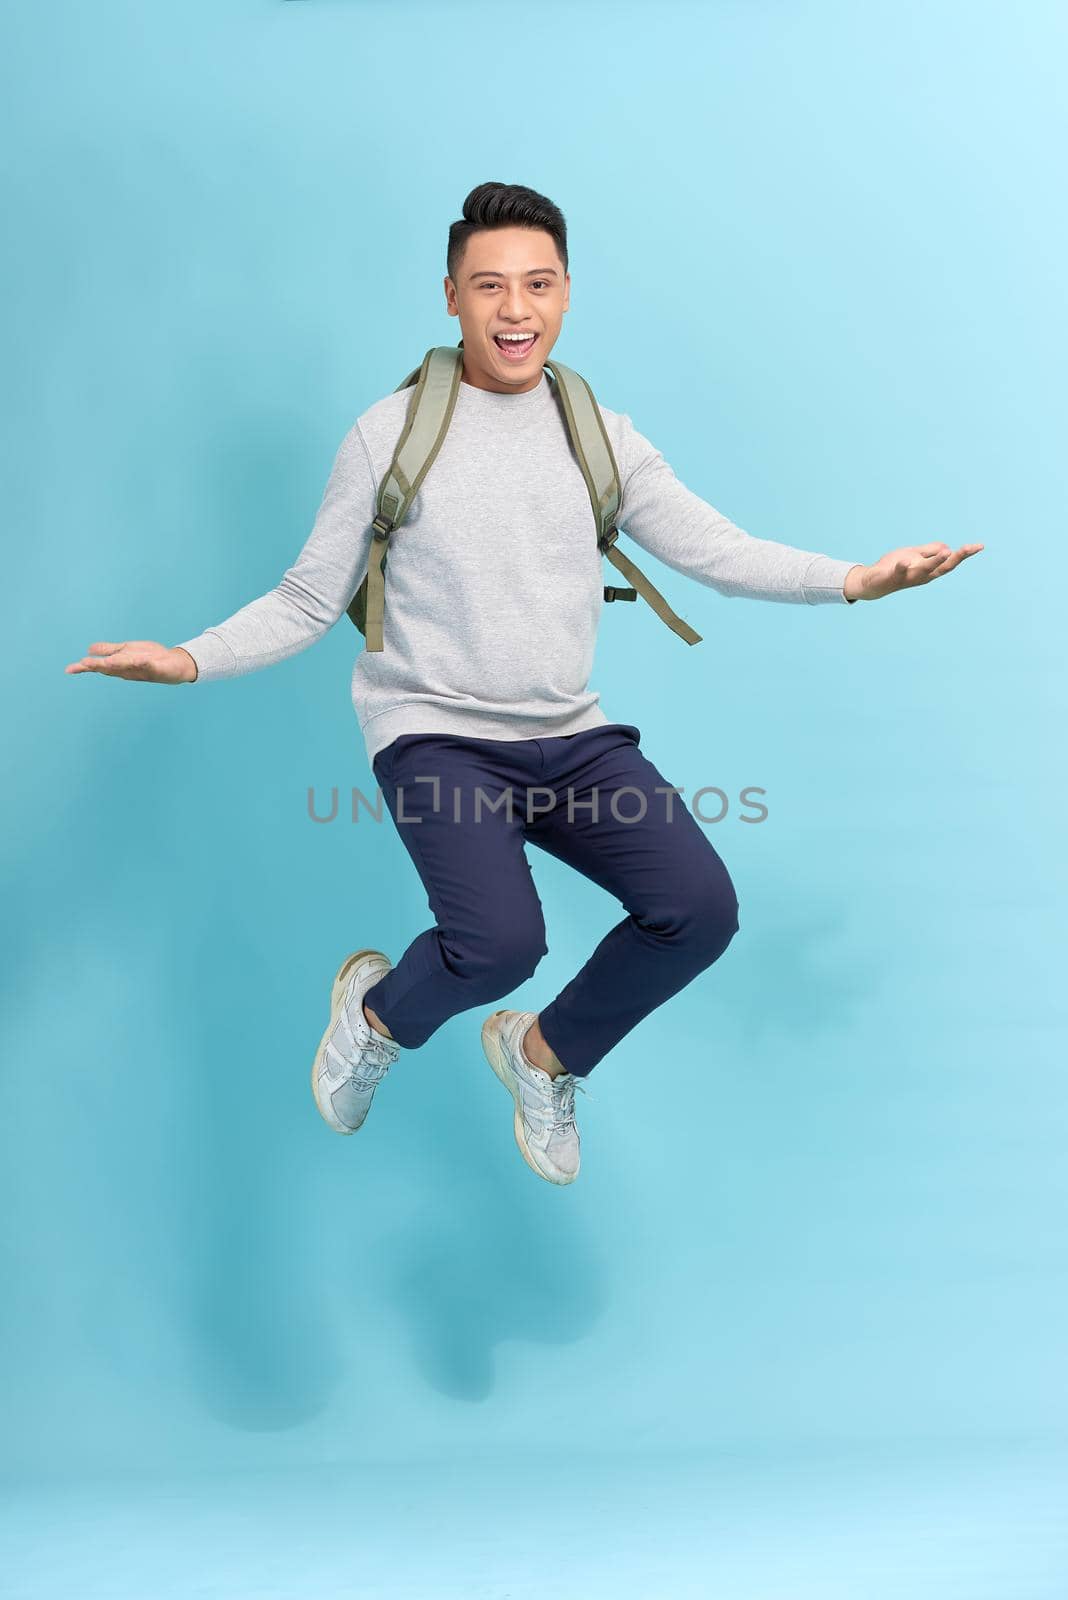 travel, tourism and people concept - happy smiling young man with backpack jumping in air over grey background